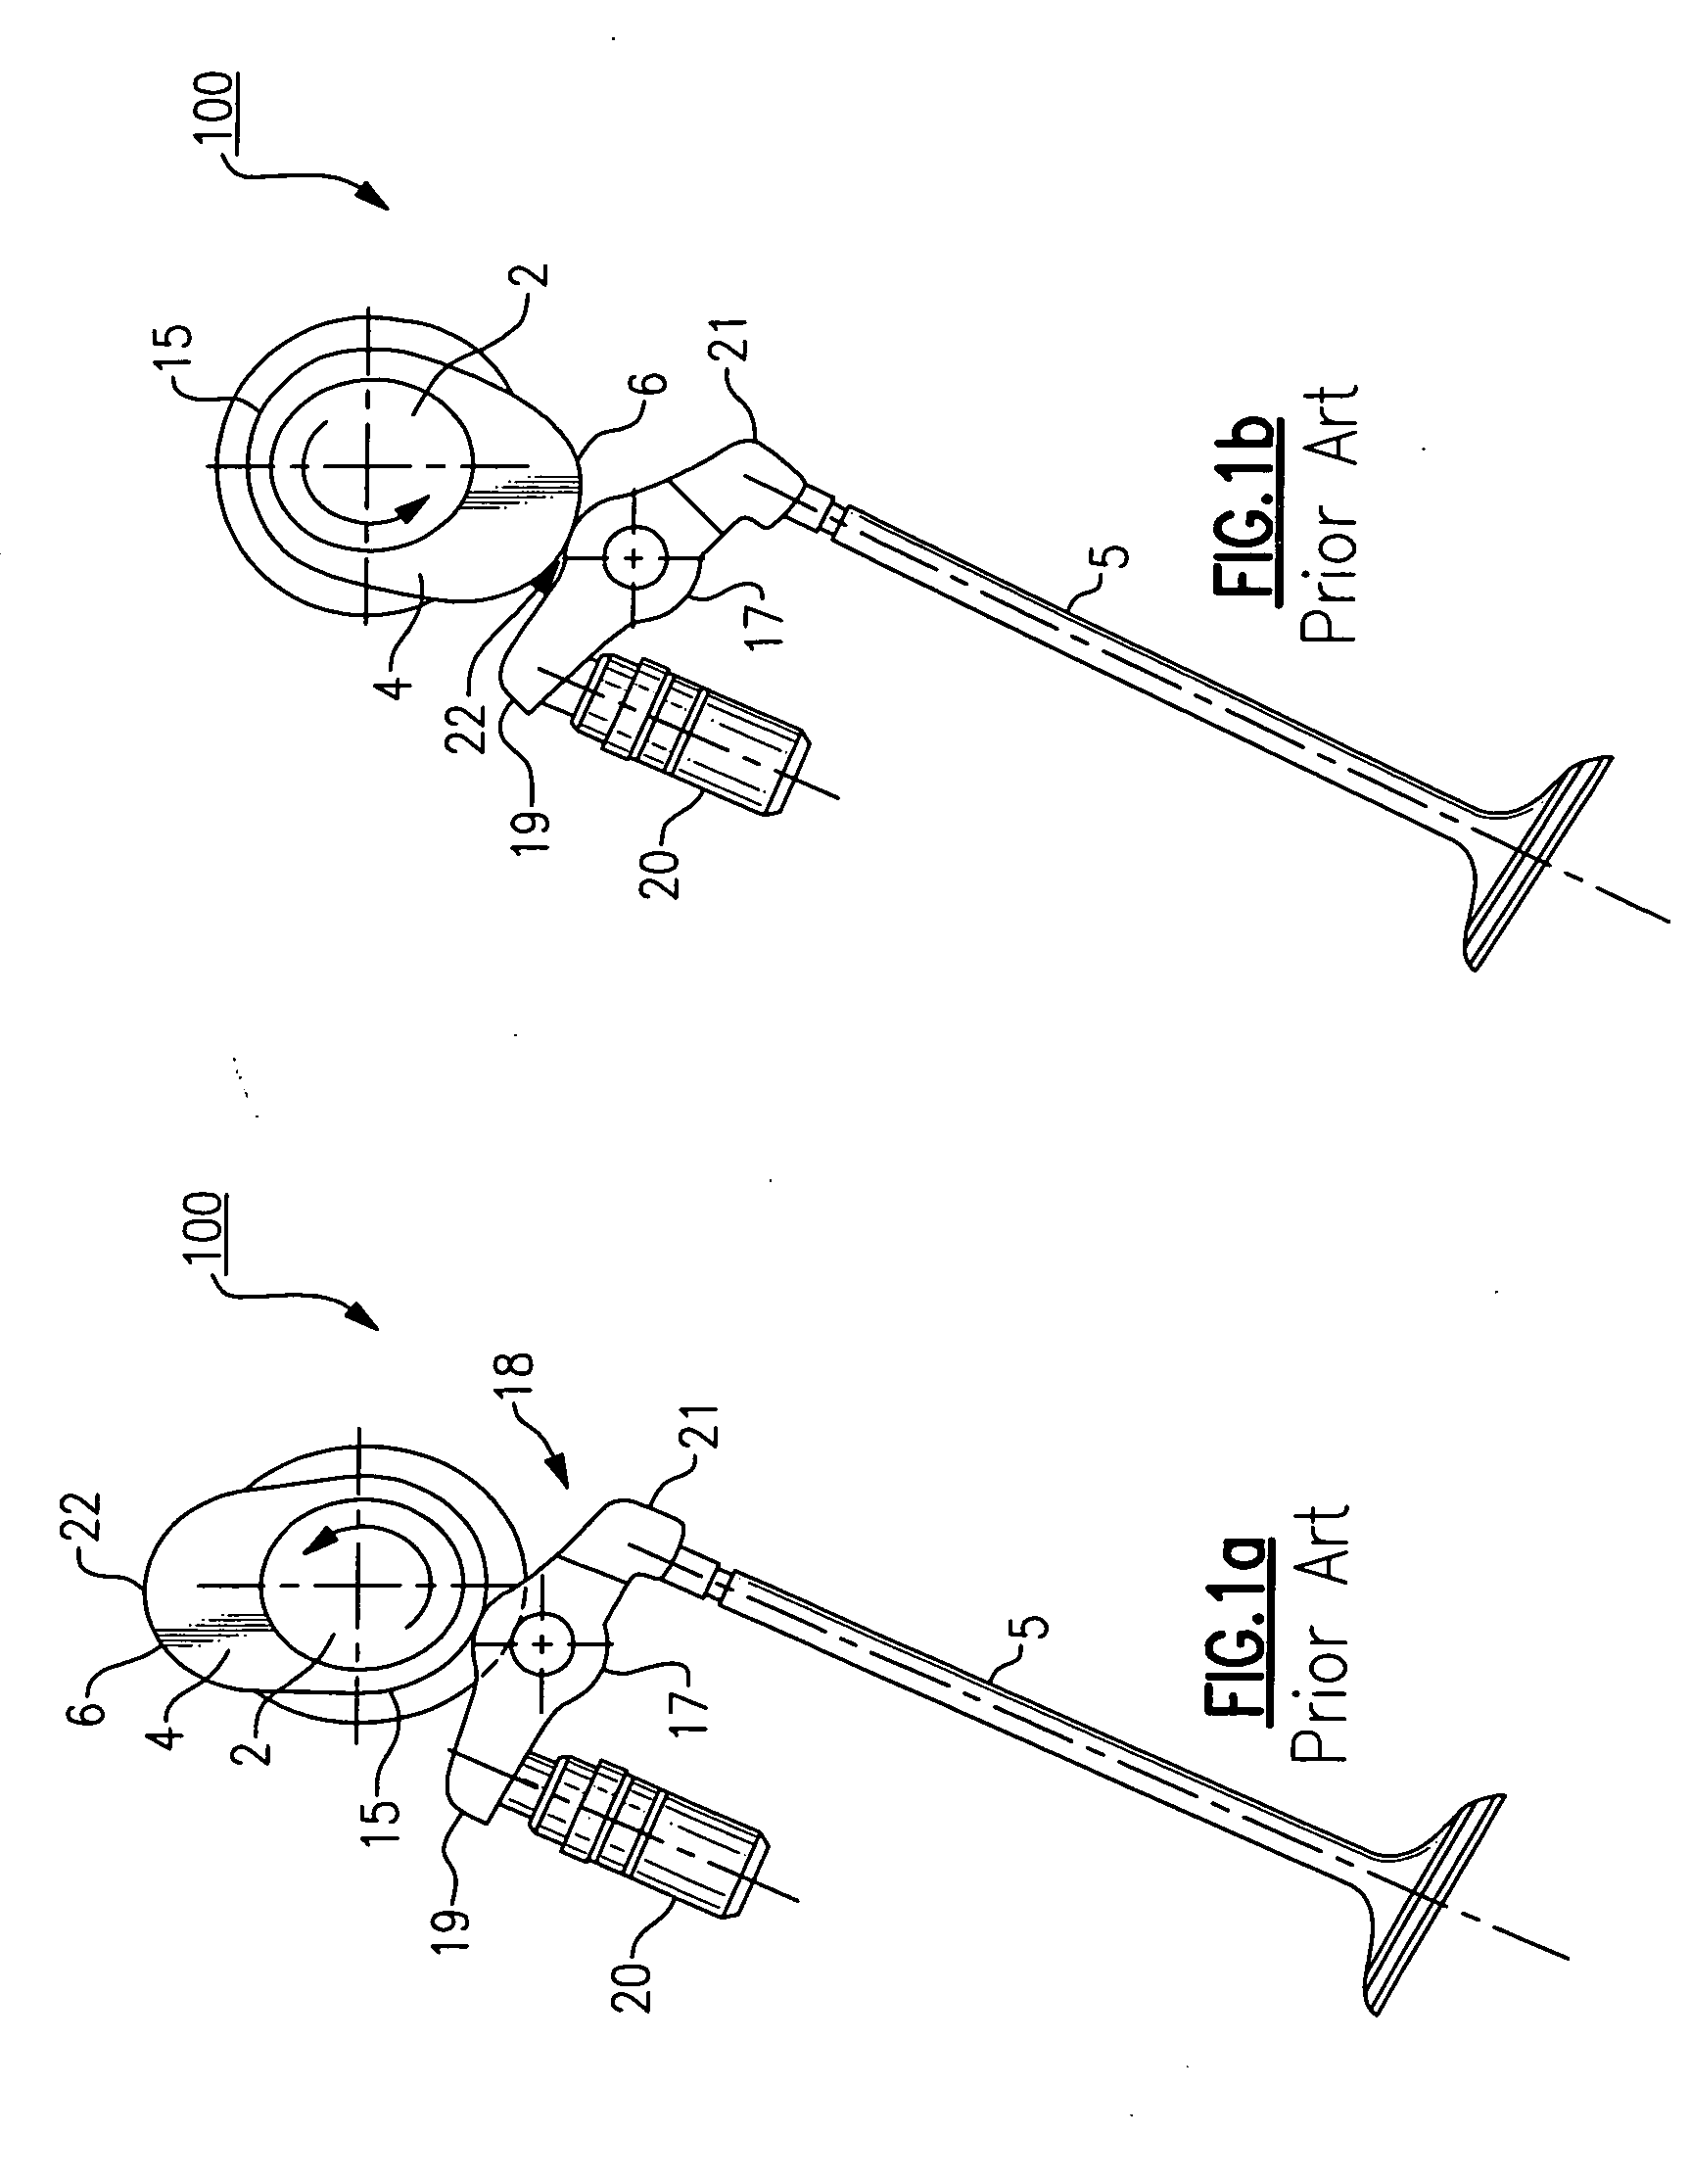 System for variable valvetrain actuation